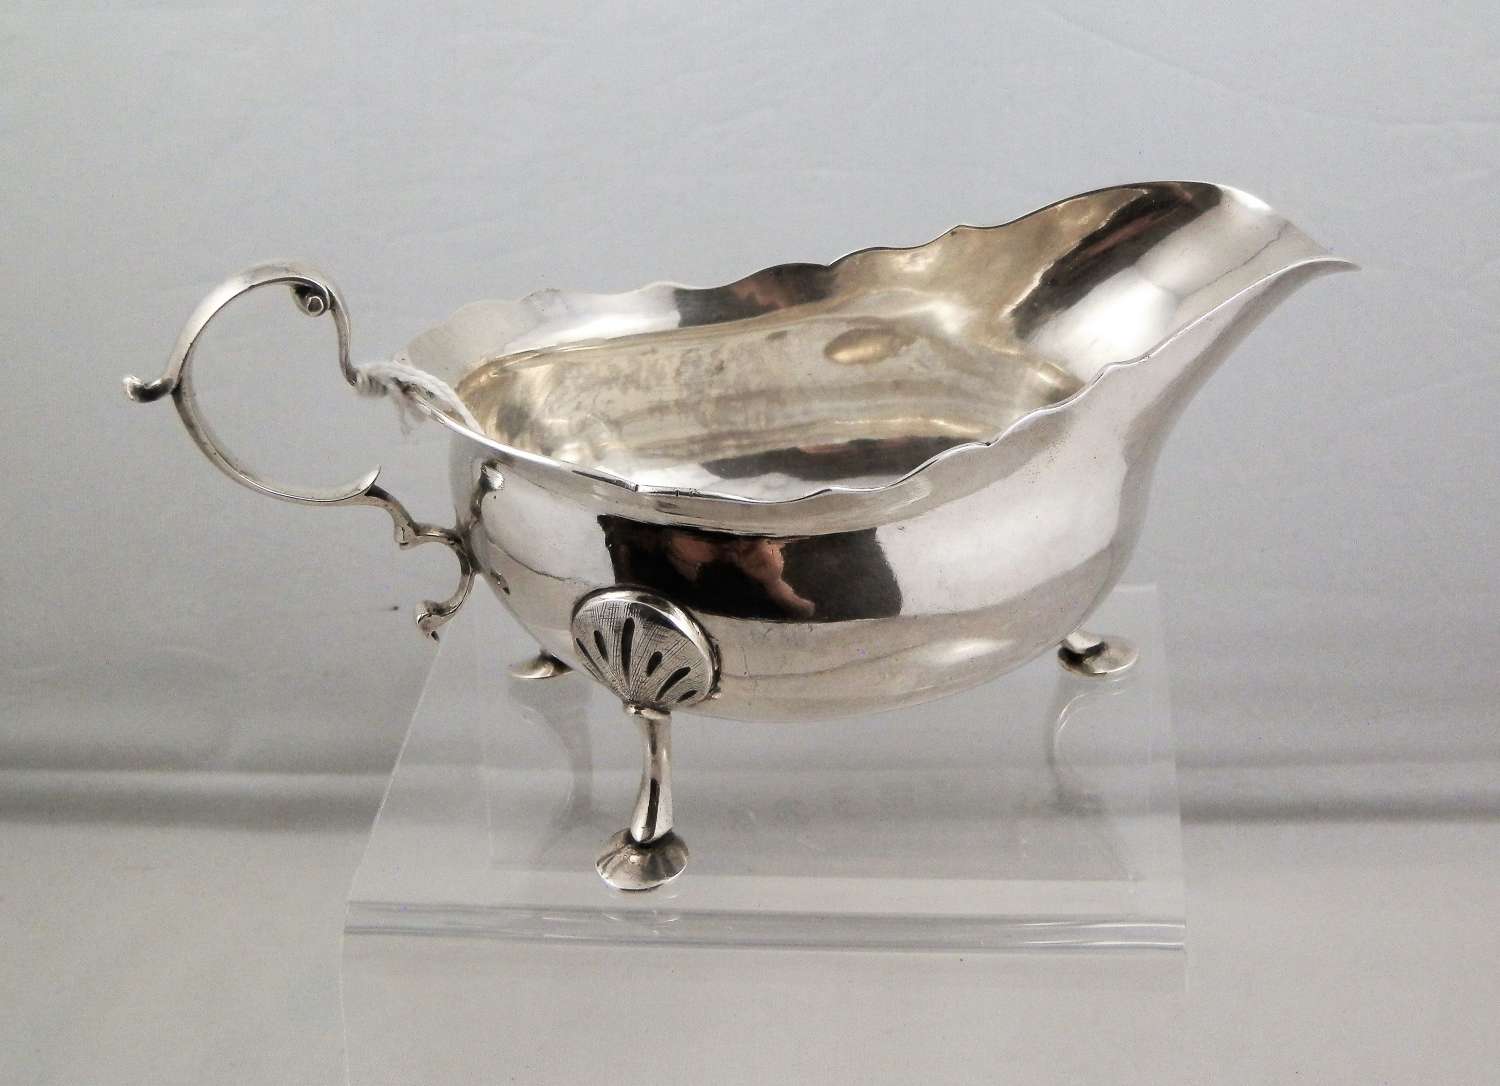 Newcastle silver sauce boat, James Crawford, 1772